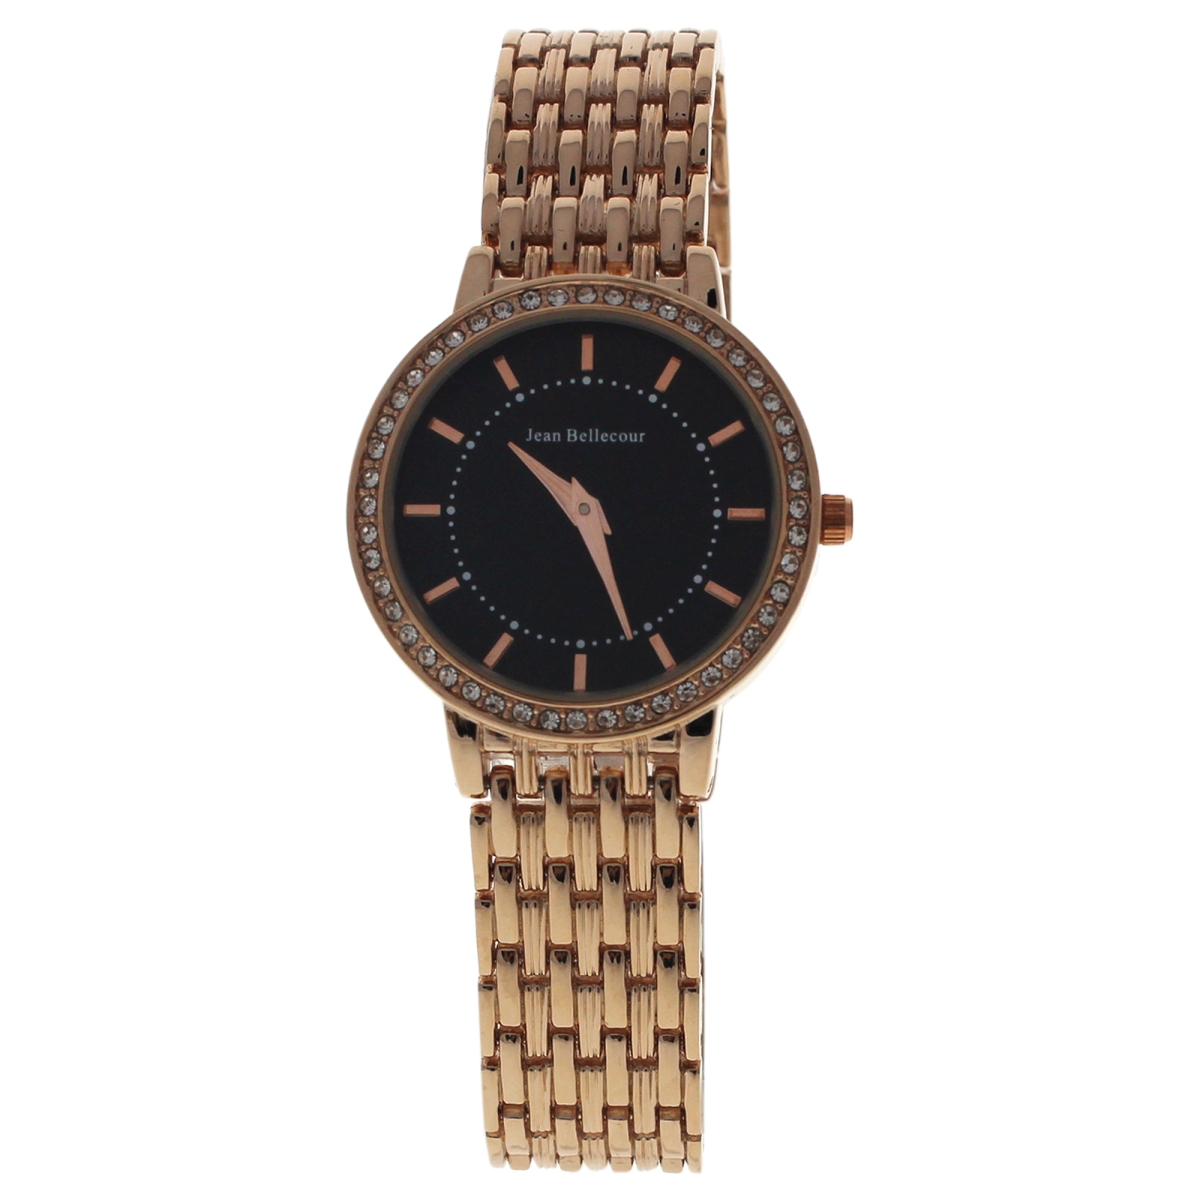 Picture of Jean Bellecour W-WAT-1420 Rose Gold Stainless Steel Bracelet Watch for Women - REDS15-RGB Sophie